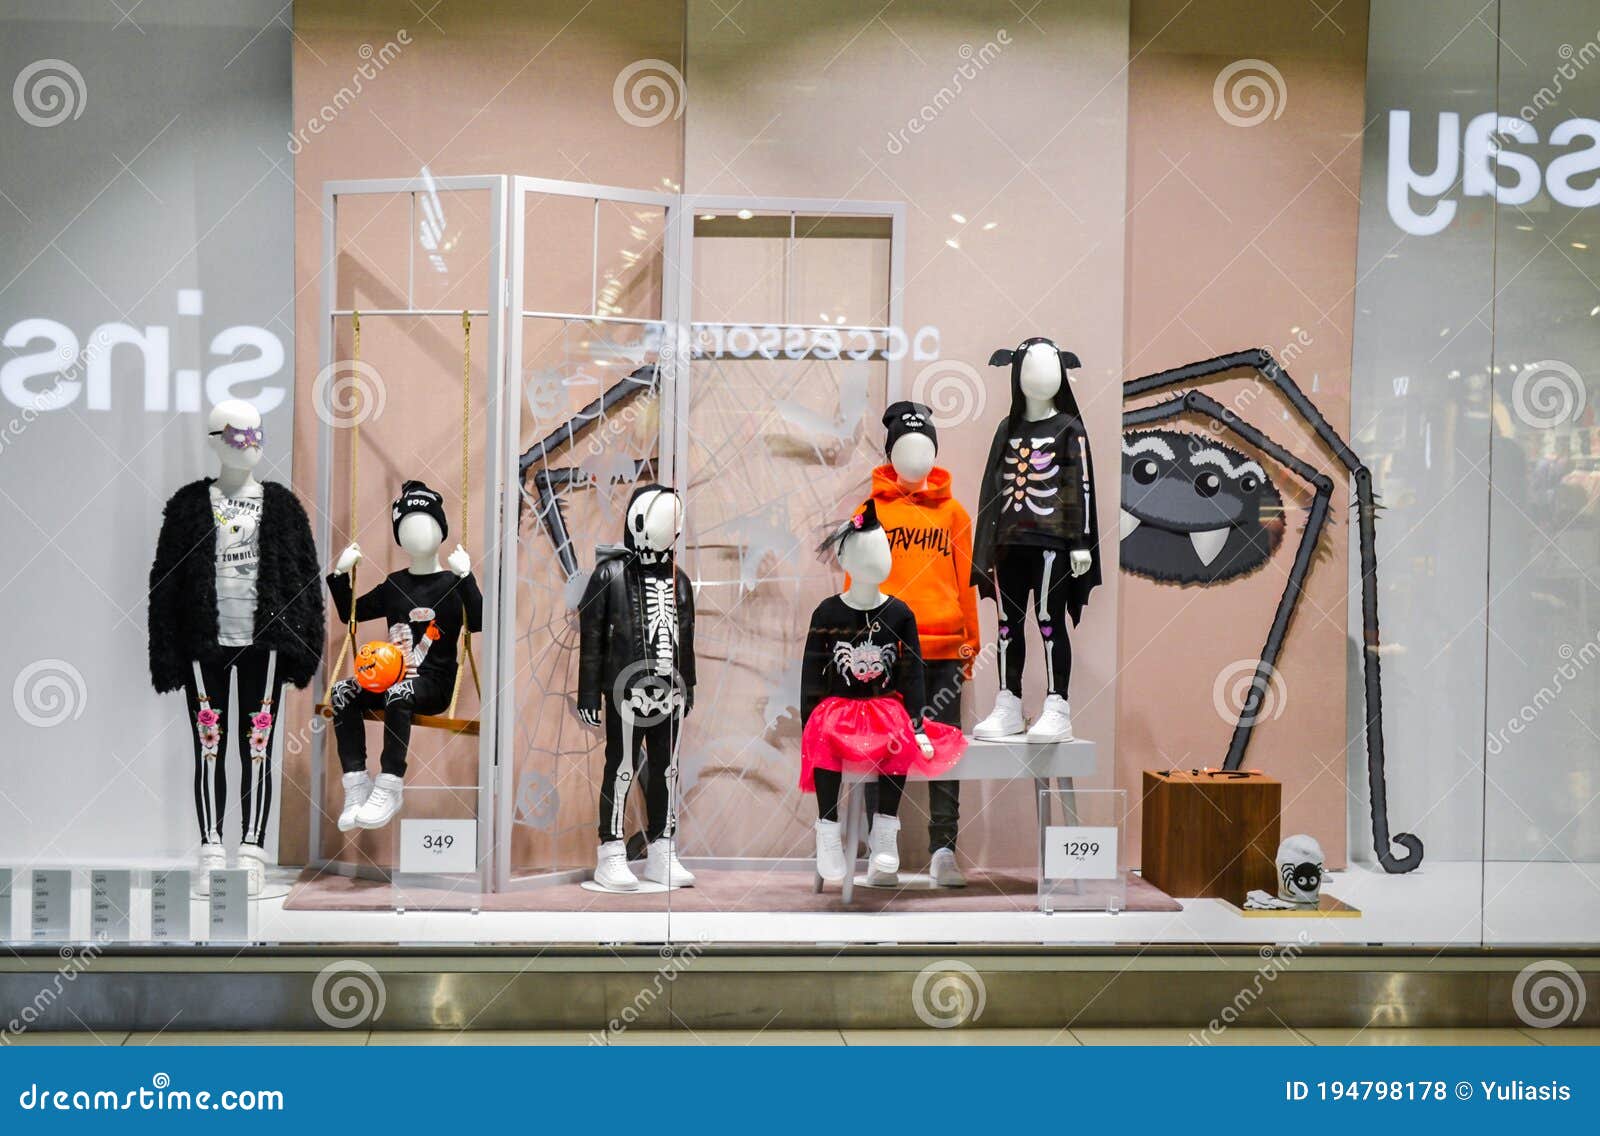 618 Fashion Hm Store Photos - Free & Royalty-Free Stock Photos from  Dreamstime